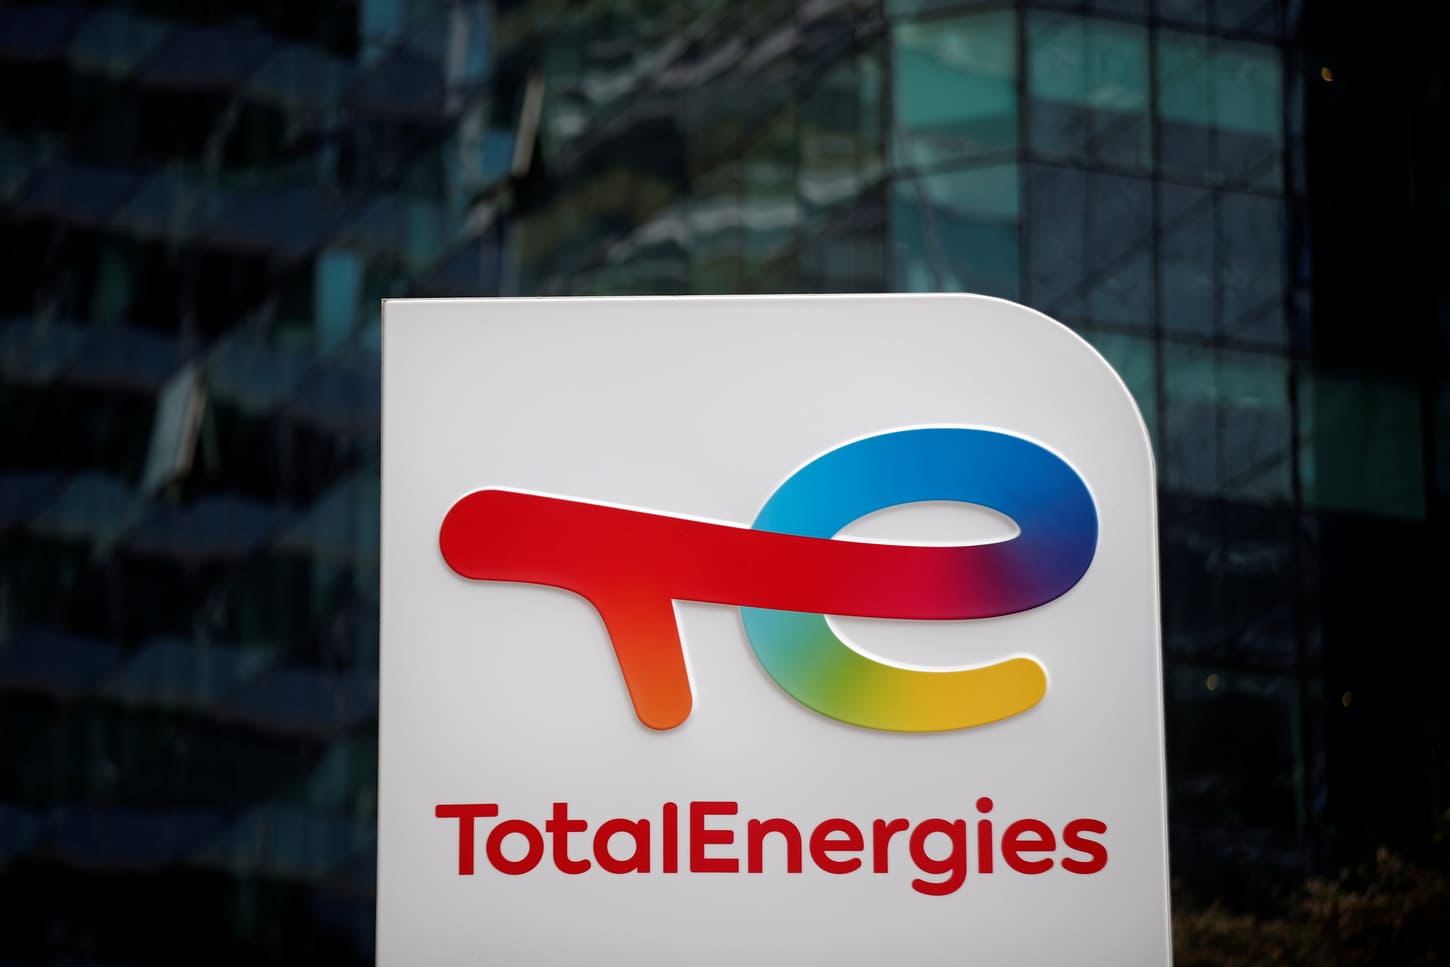 Total Energy’s business results in the first quarter of 2023 are declining significantly